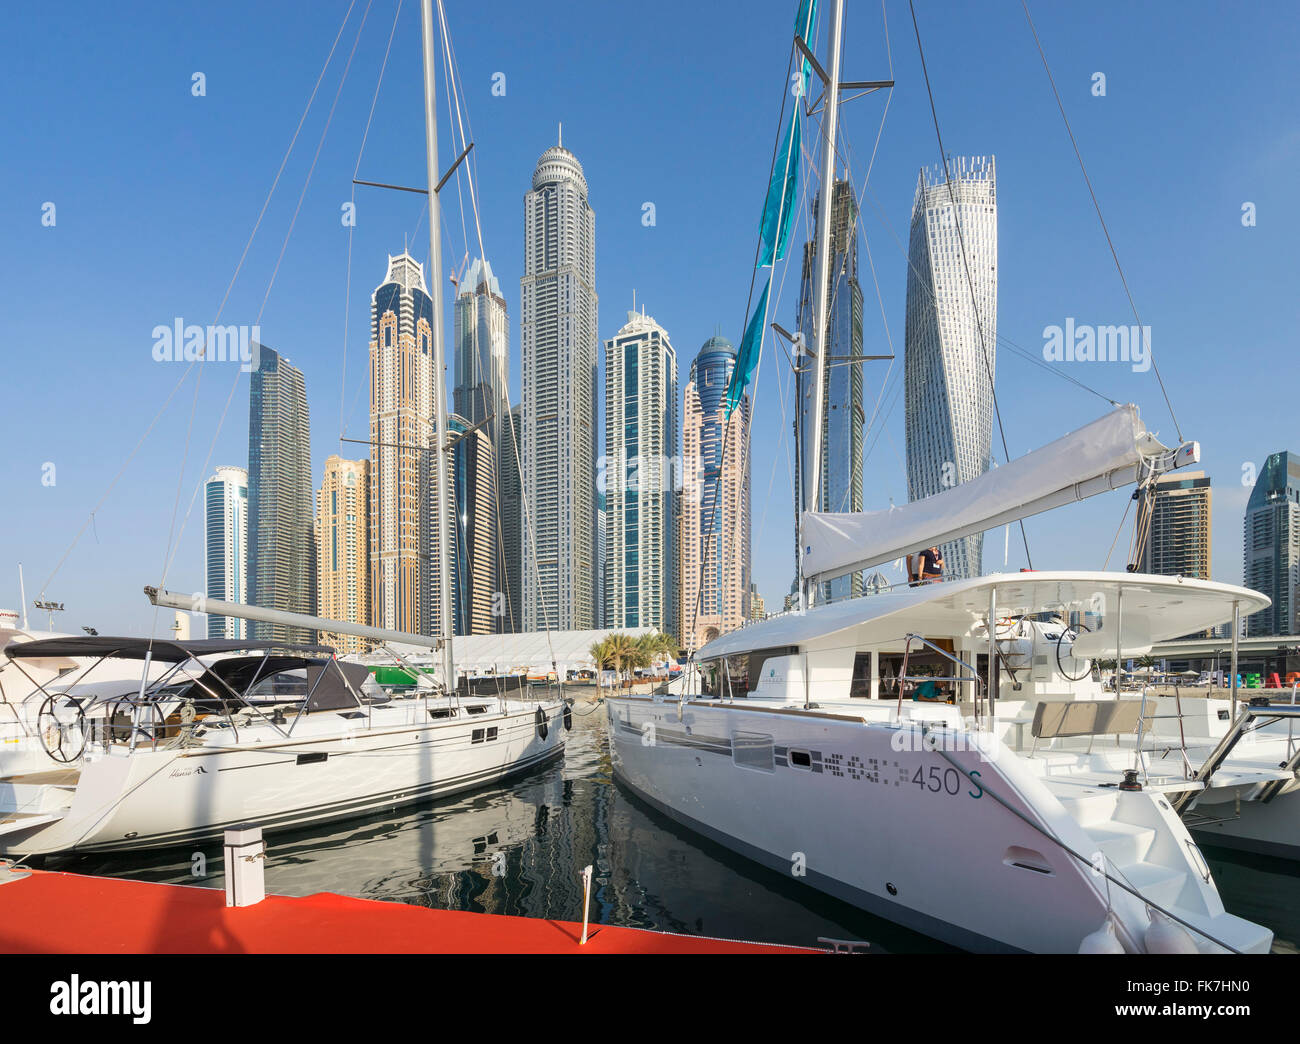 Luxury yachts on display and skyline of skyscrapers on the opening day of the Dubai International Boat Show 2016 . Stock Photo